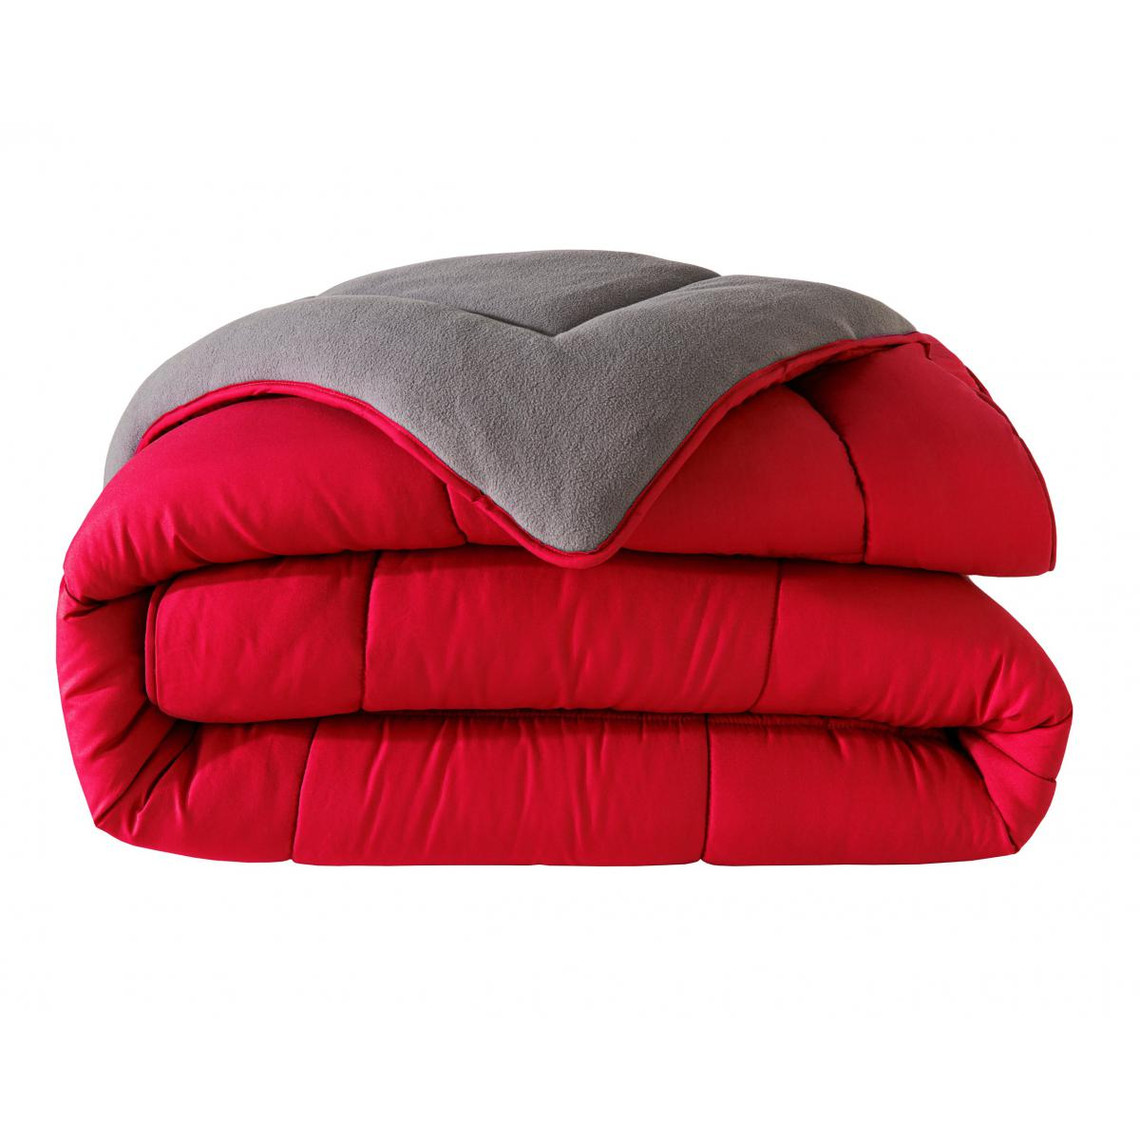 Couette HEBE 400 g/m² rouge en polyester